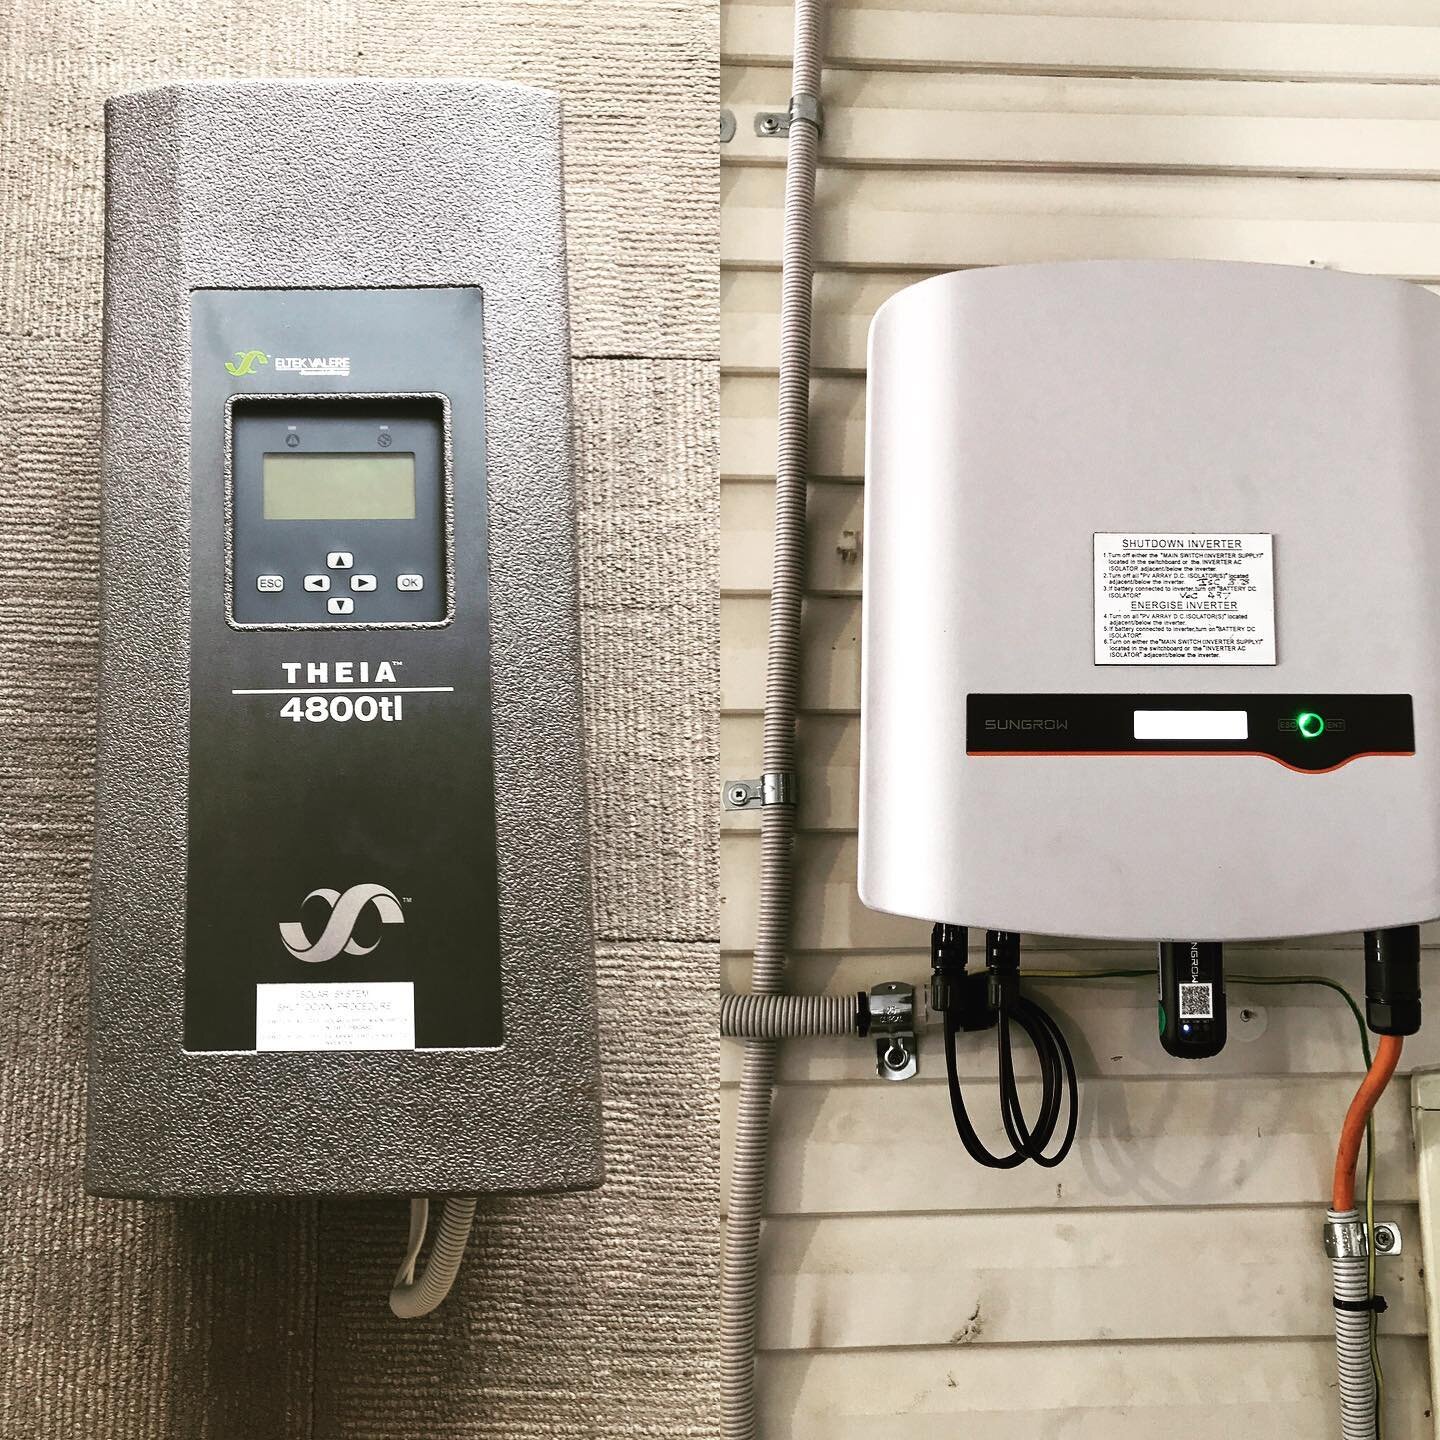 We also replace broken down inverters. 

From an old Single tracking 5 kw Inveter to a new dual tracking 5 kw Sungrow Inverter. 
The customers panels are perfectly fine but the Inverter had broken down. The customer is on the old 44 cents feed in tar